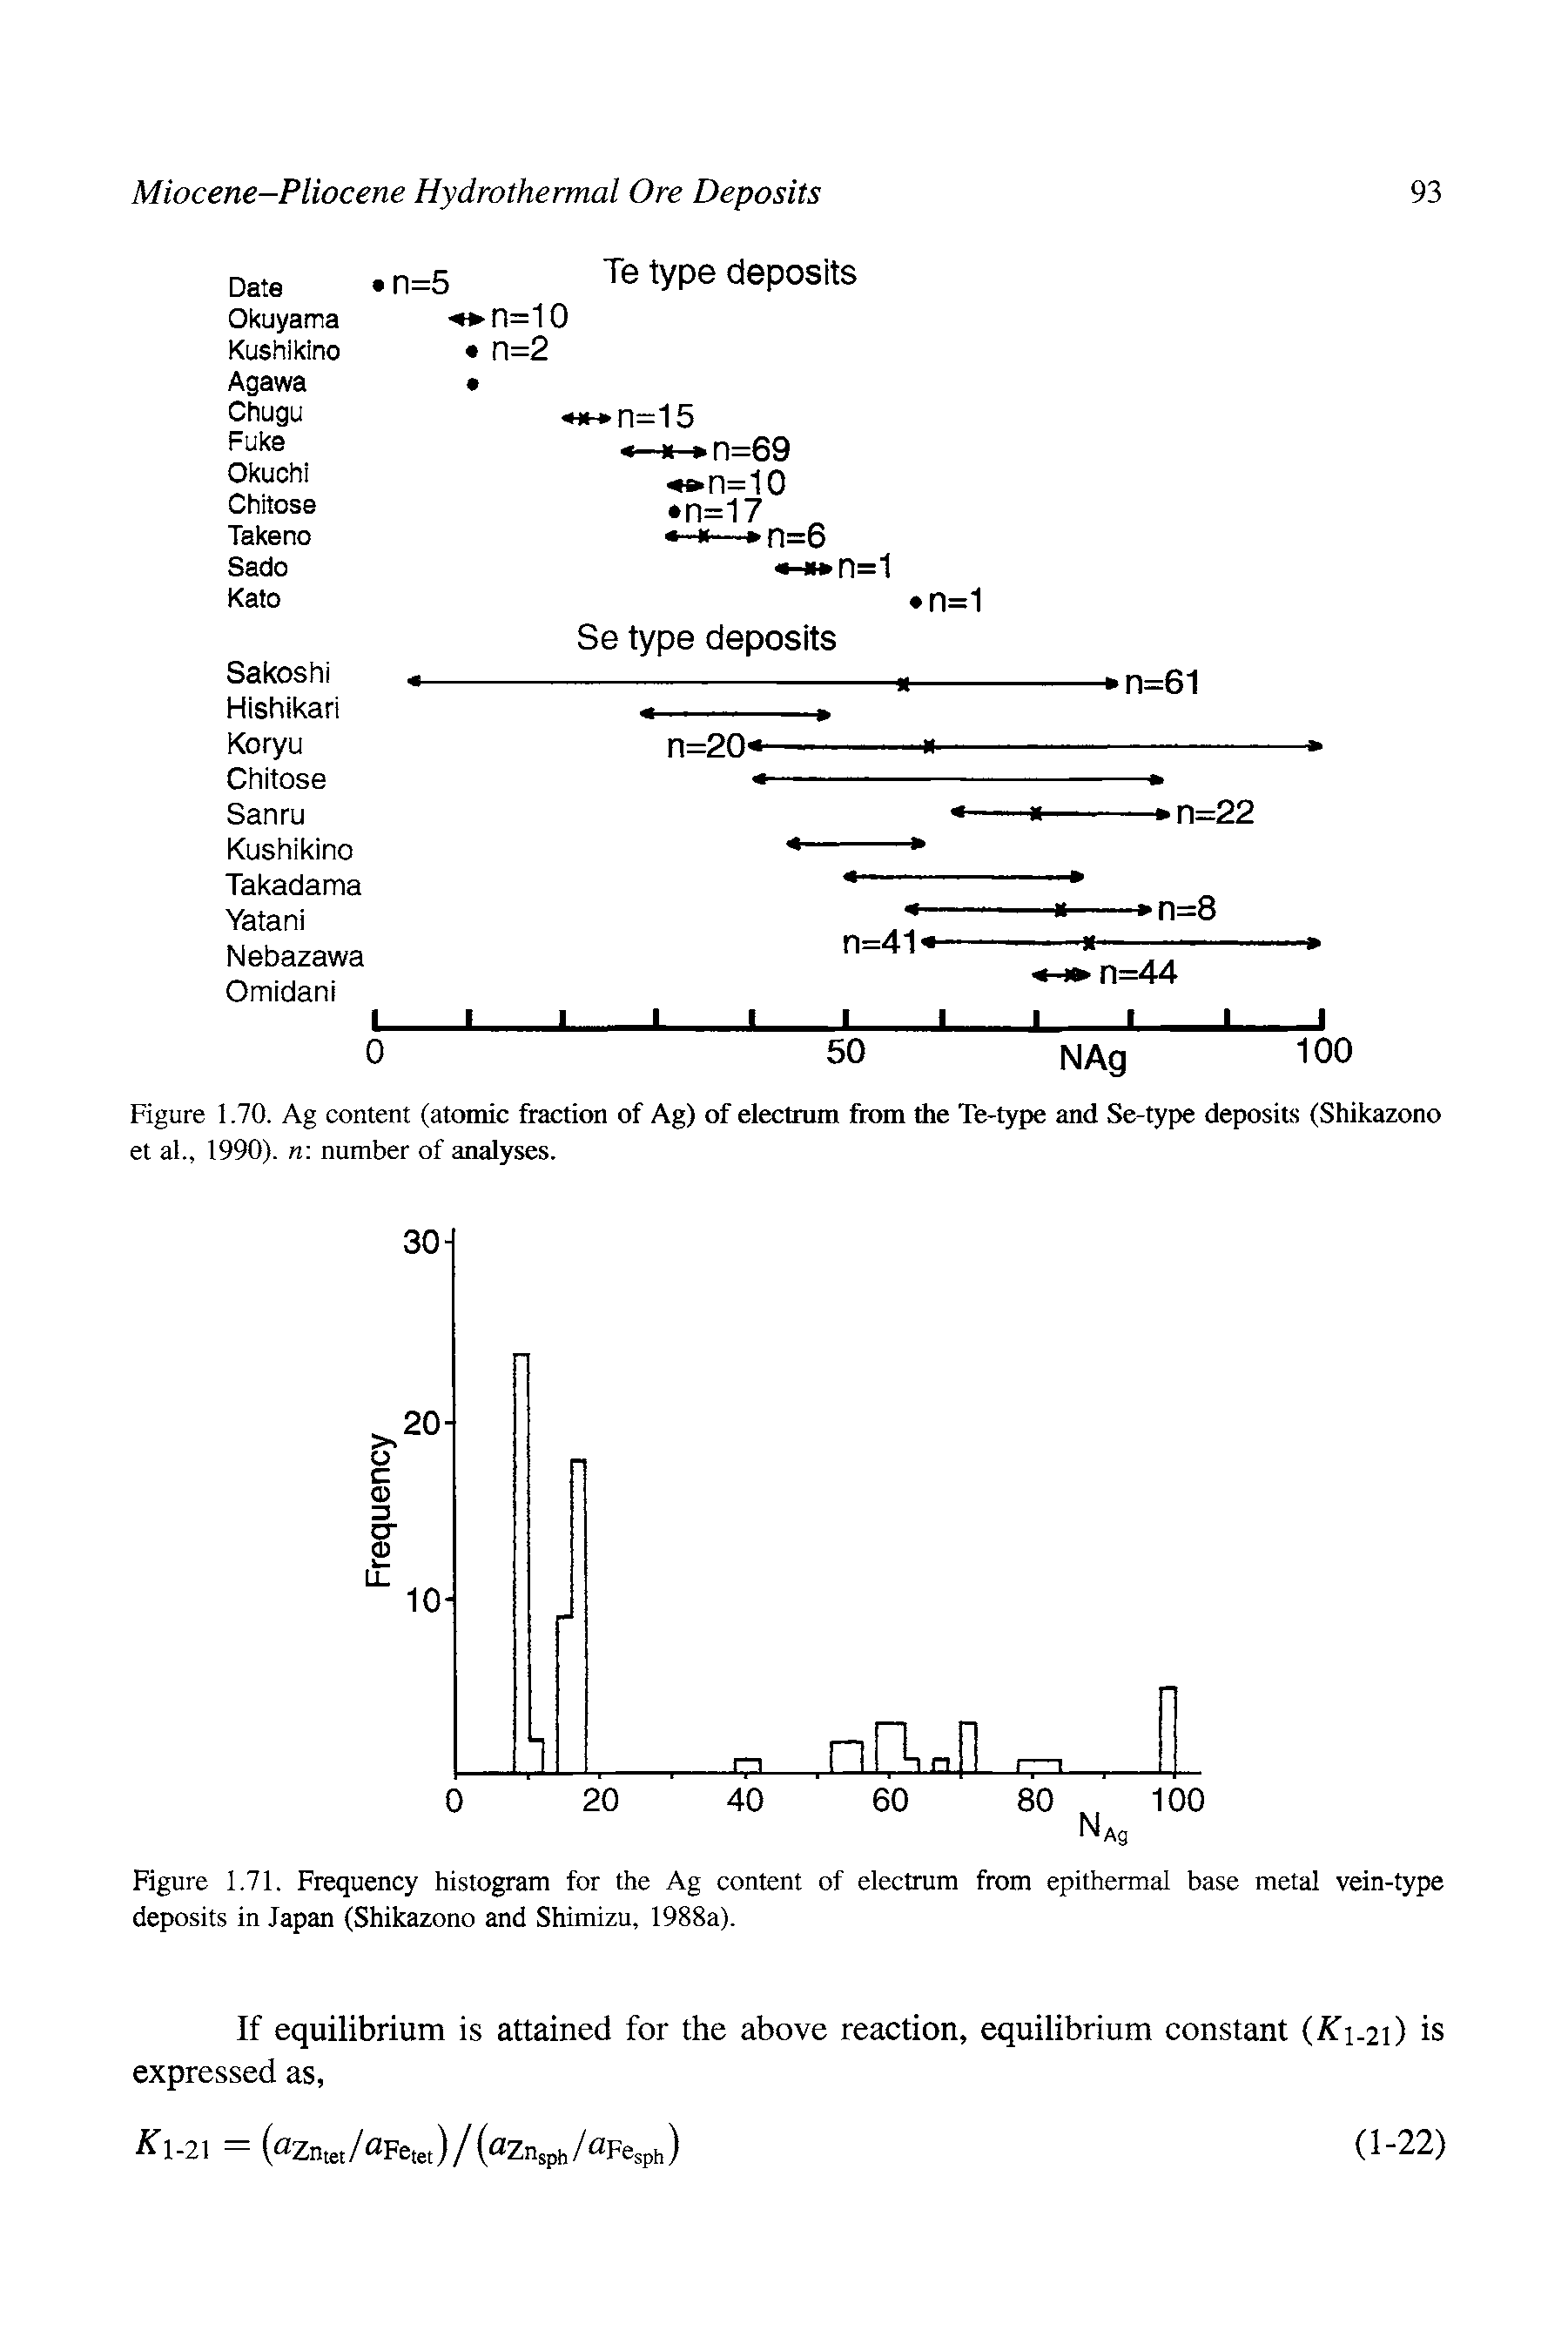 Figure 1.70. Ag content (atomic fraction of Ag) of electrum from the Te-type and Se-type deposits (Shikazono et al., 1990). rr. number of analyses.